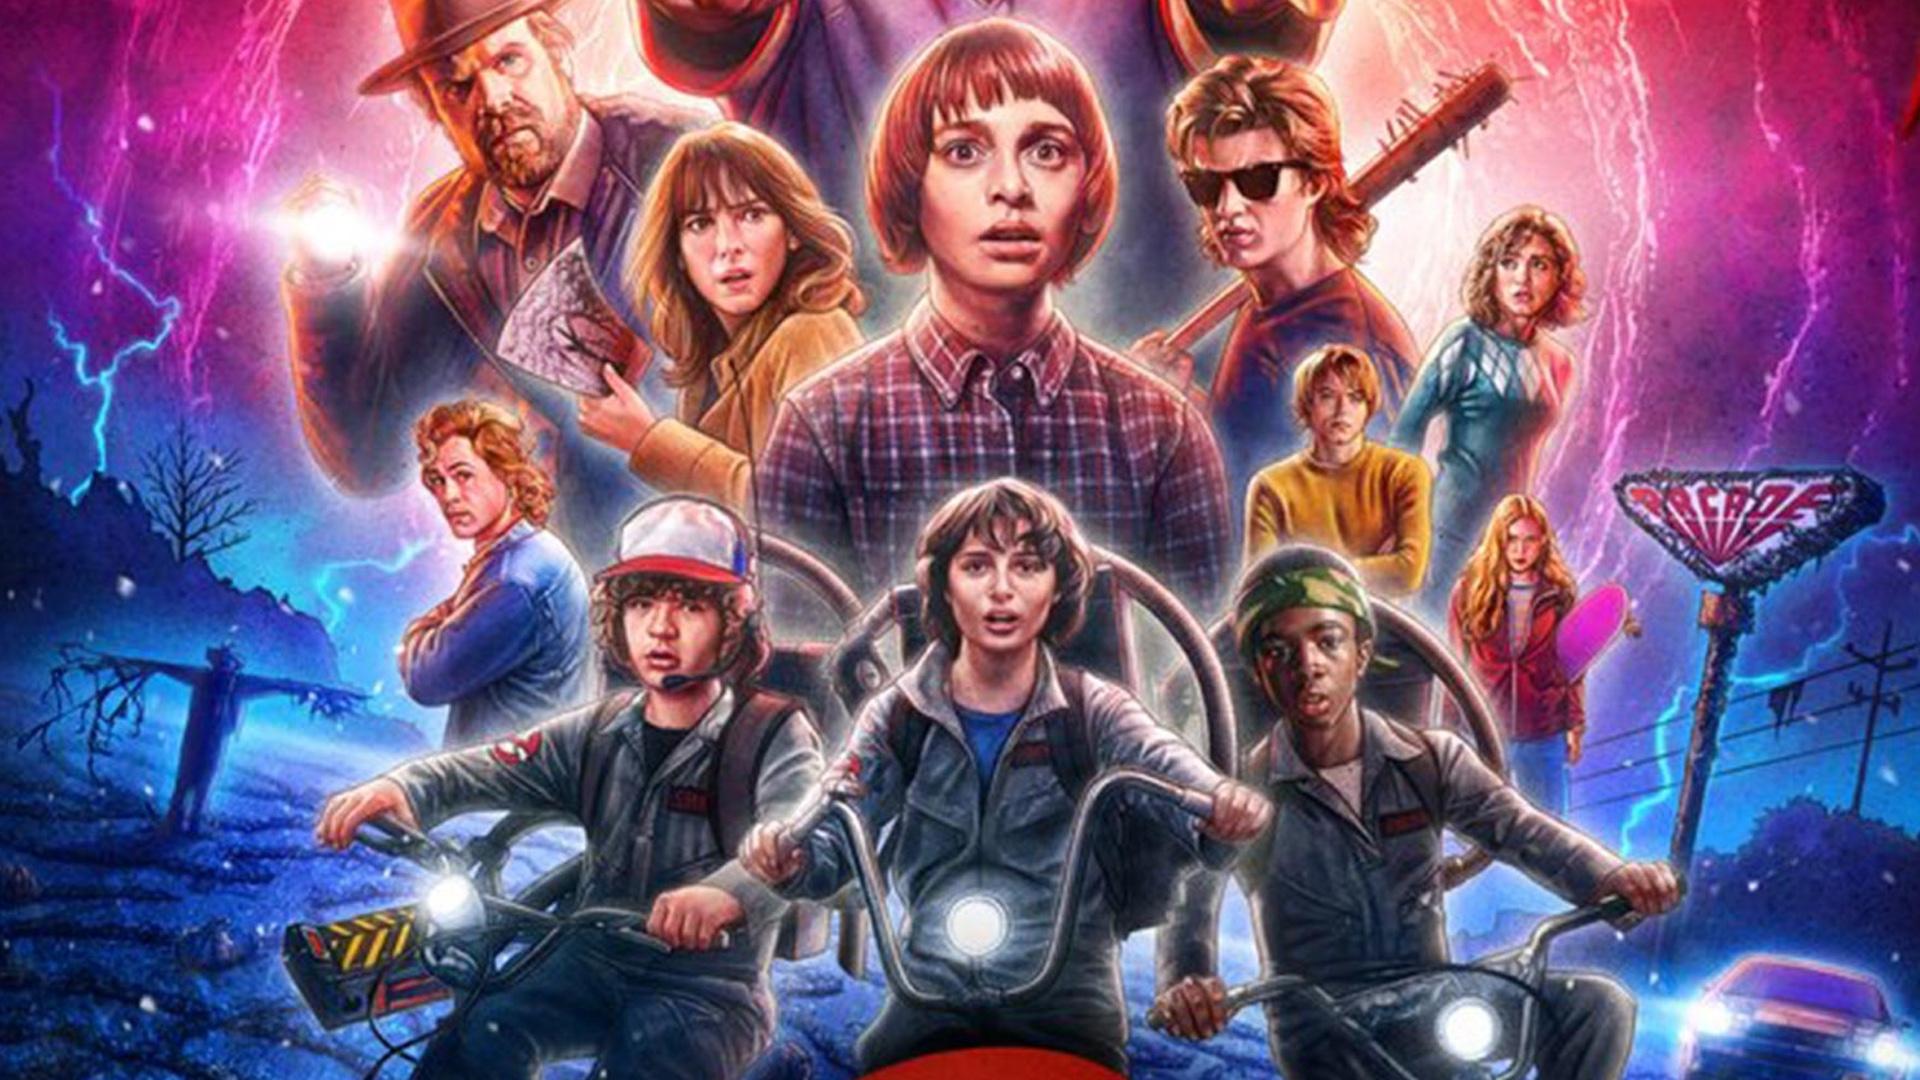 Stranger Things Season 3 2019 4k HD Tv Shows 4k Wallpapers Images  Backgrounds Photos and Pictures